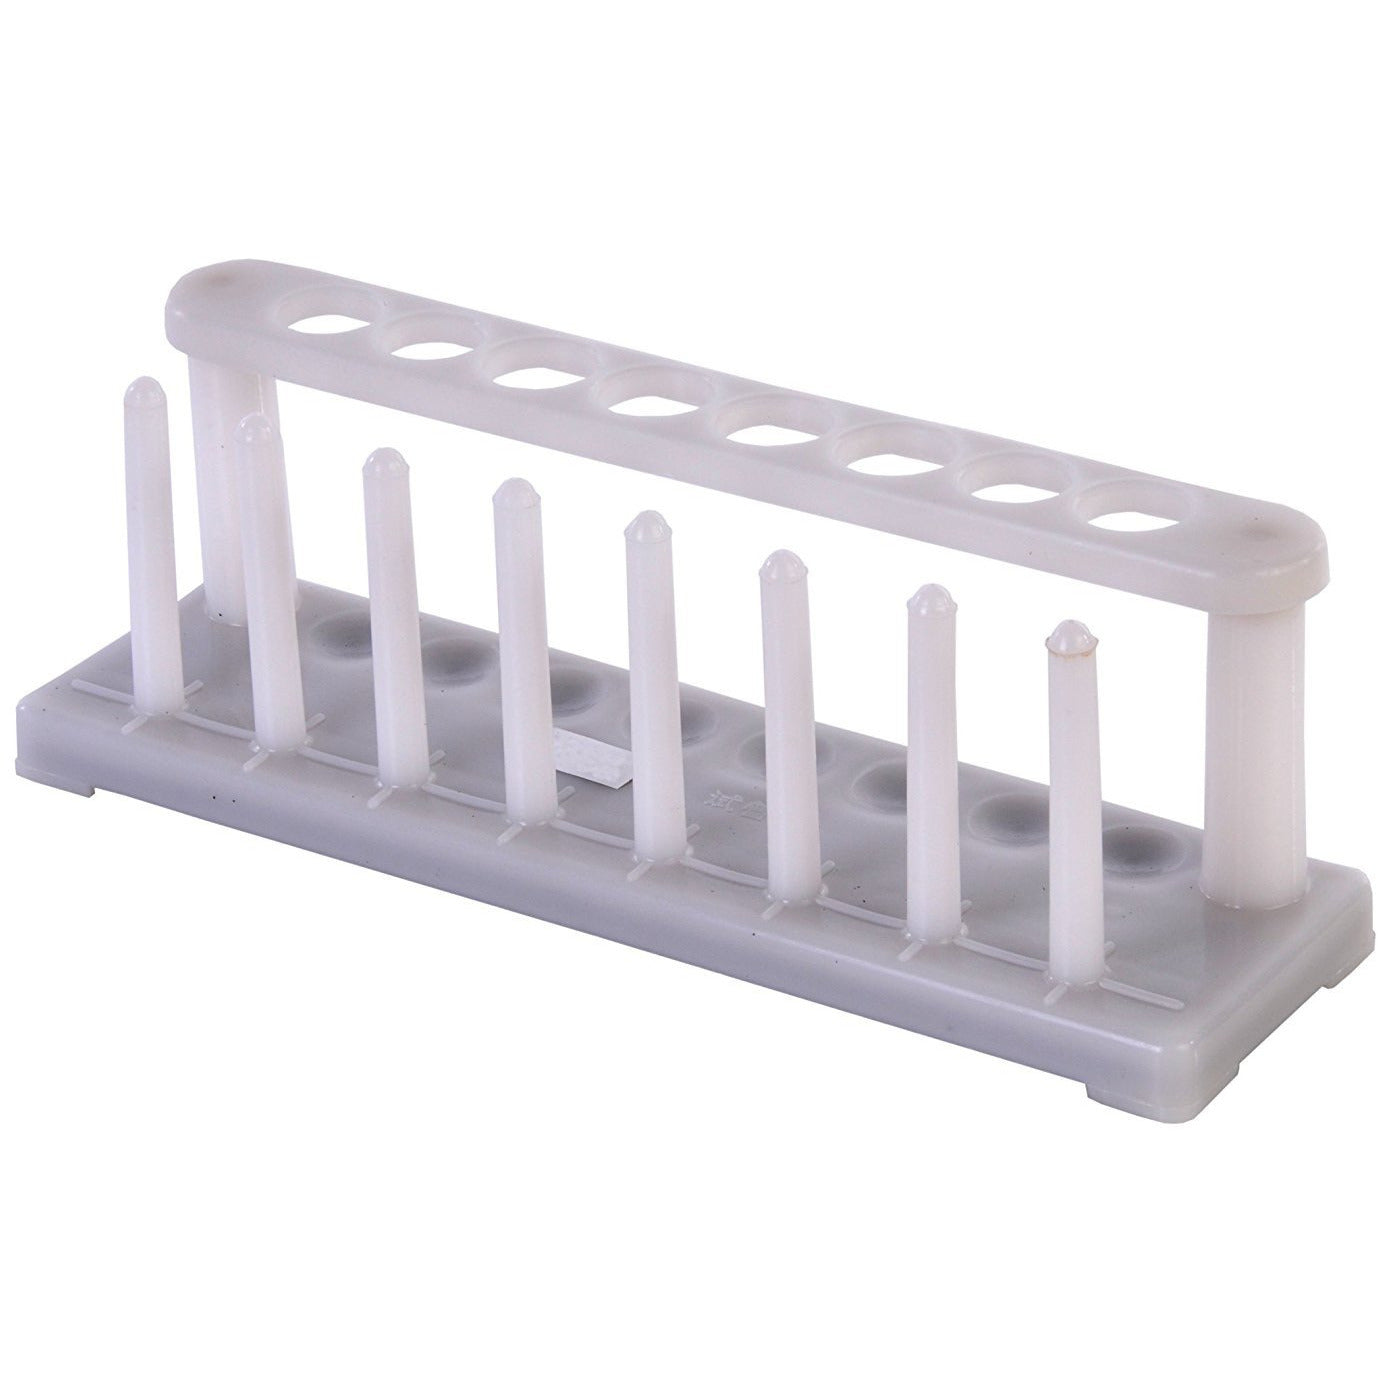 TEST TUBE RACK POLYETHYLENE Stout, white, in line, for 8 tubes, holes in the top plate correspond with hemispherical depressions in the base